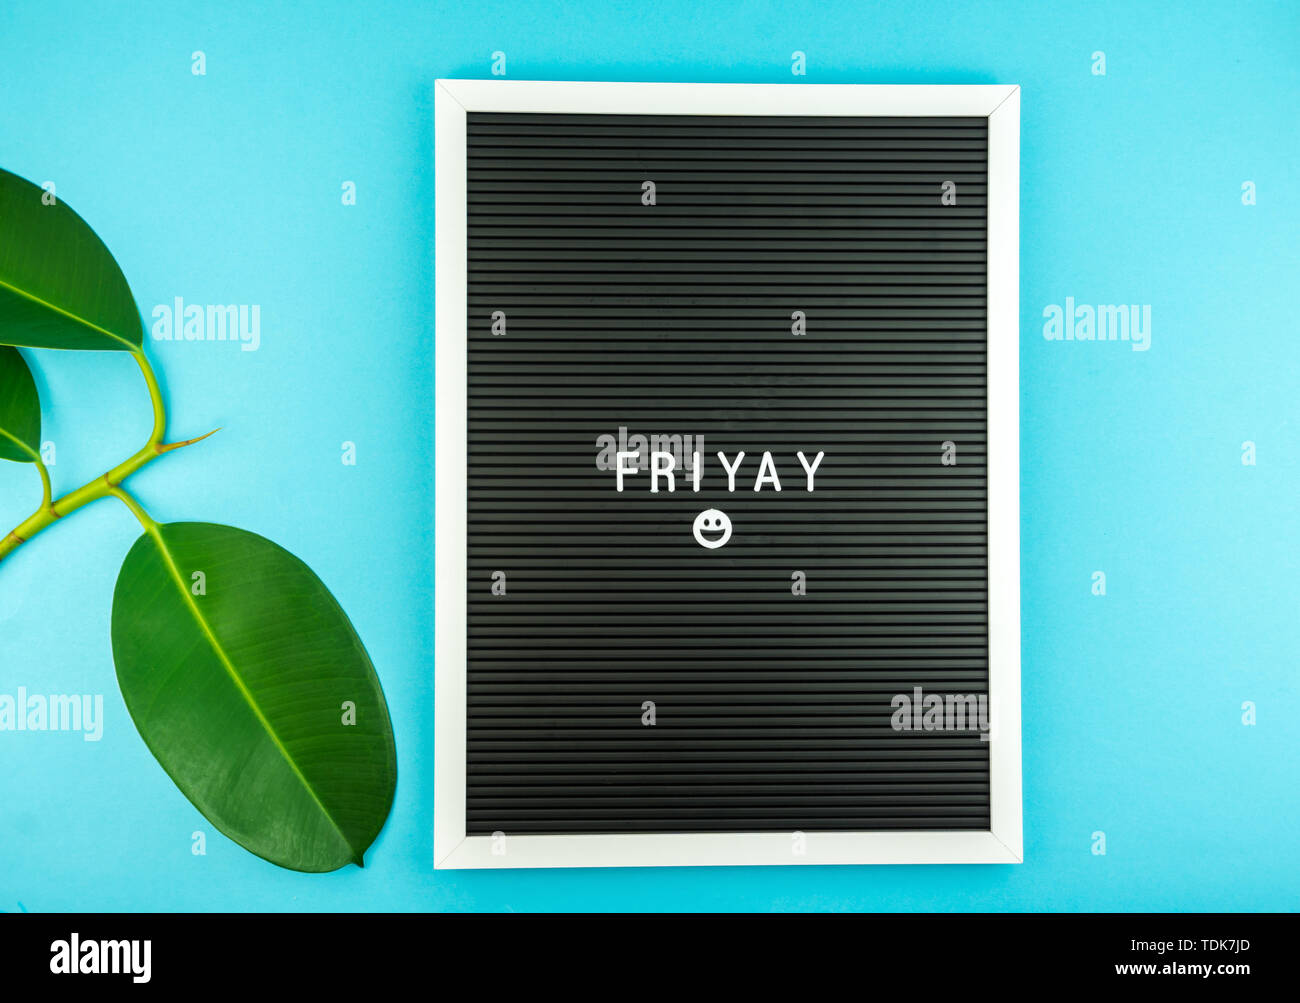 The word FRIDAY on a letter board with happy smiley emoji against blue background Stock Photo